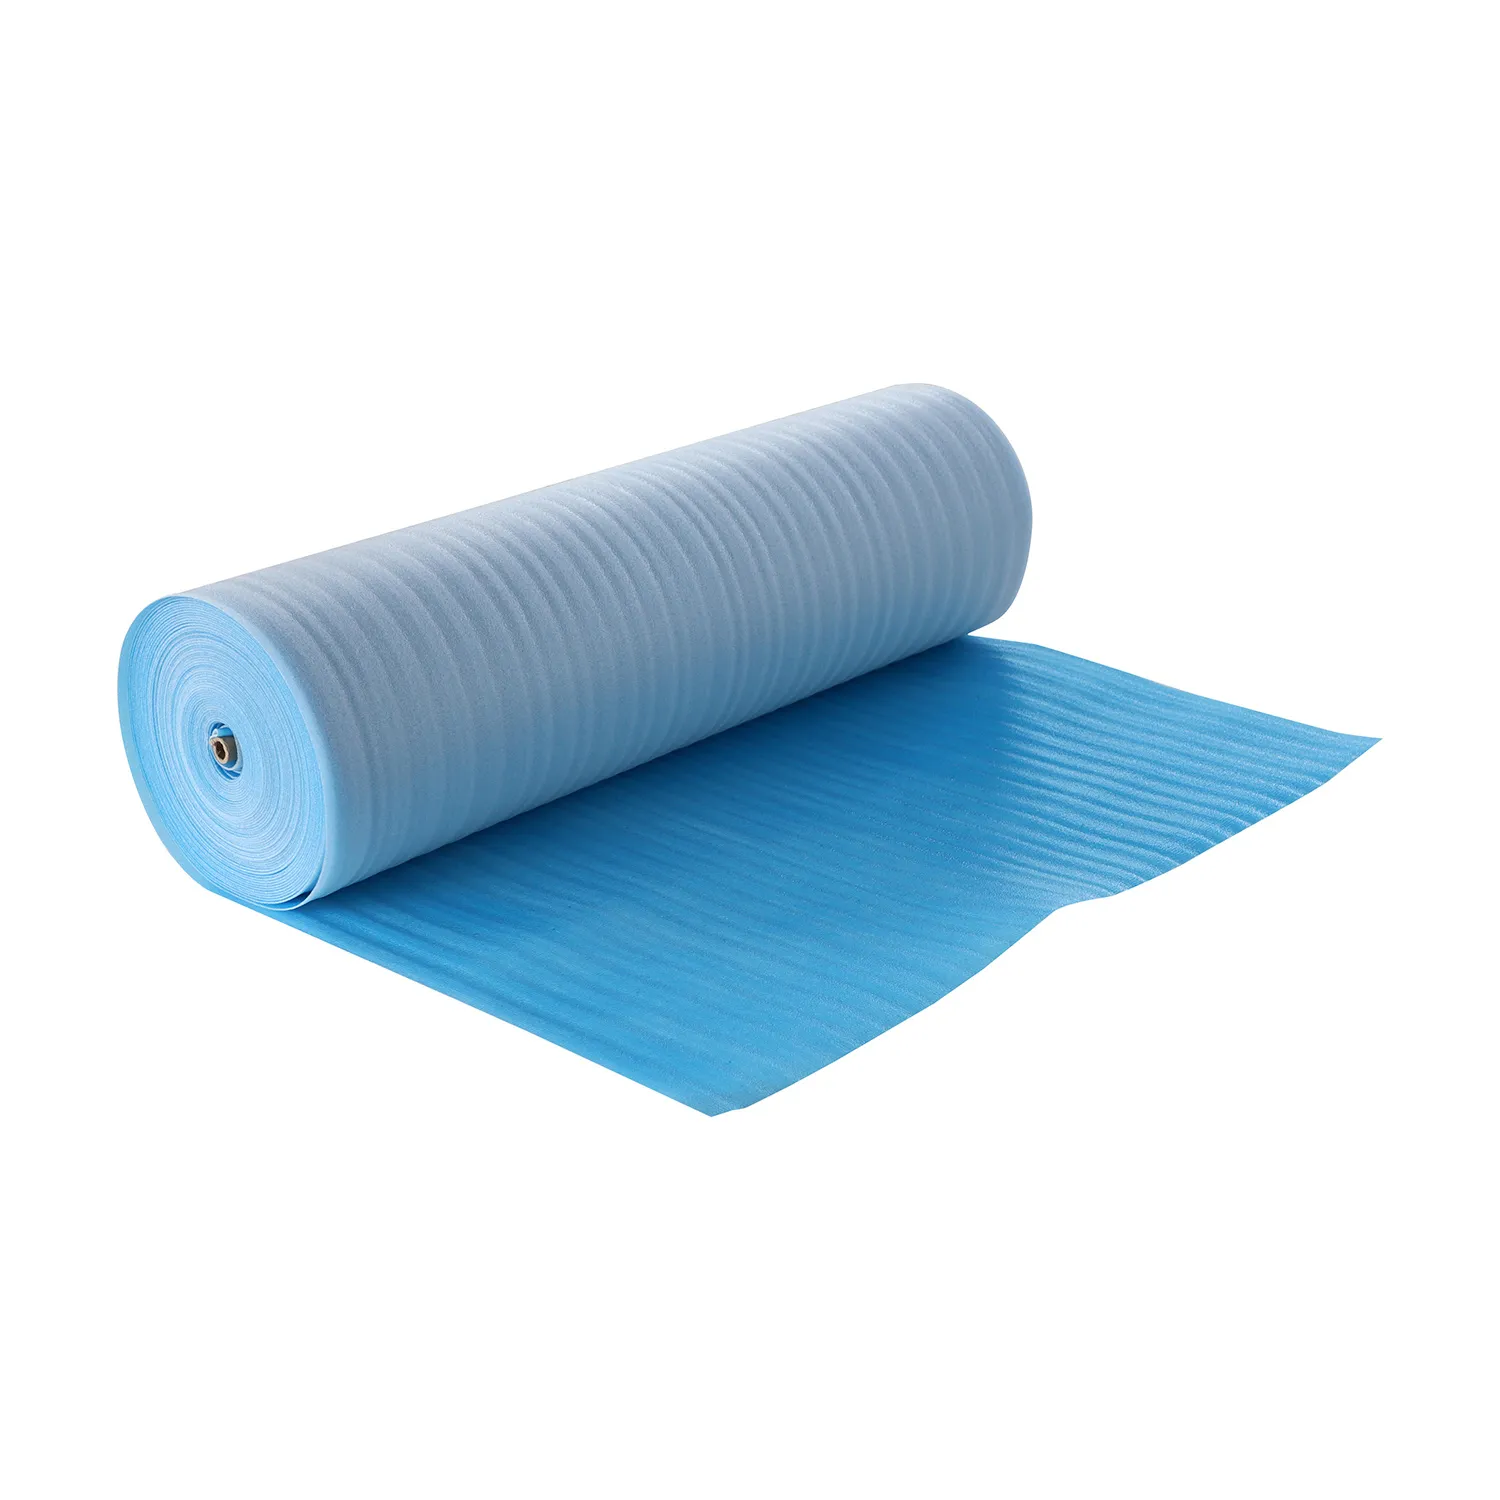 epe foam blocks Protective Packing materials Expanded Polyethylene 1mm 2mm 3mm 4mm 5mm EPE Foam Roll/Sheet